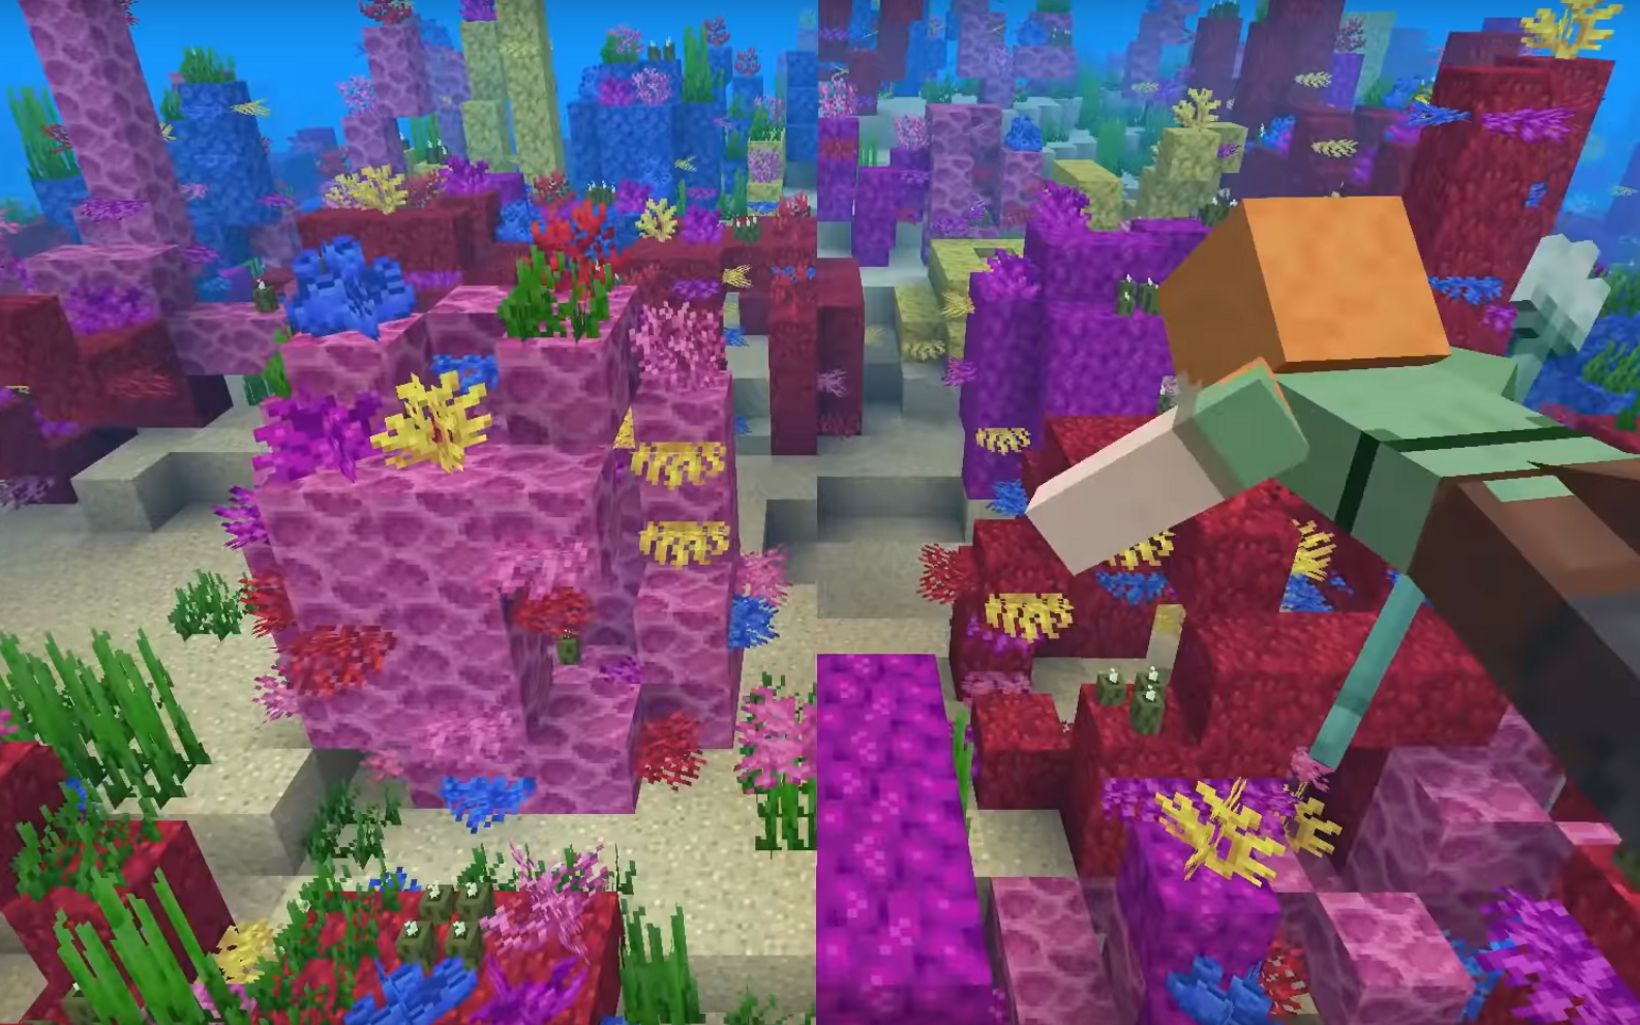 Minecraft’s in-game oceans include five new coral reefs to build – staghorn, brain, fire, bubble and tube. 